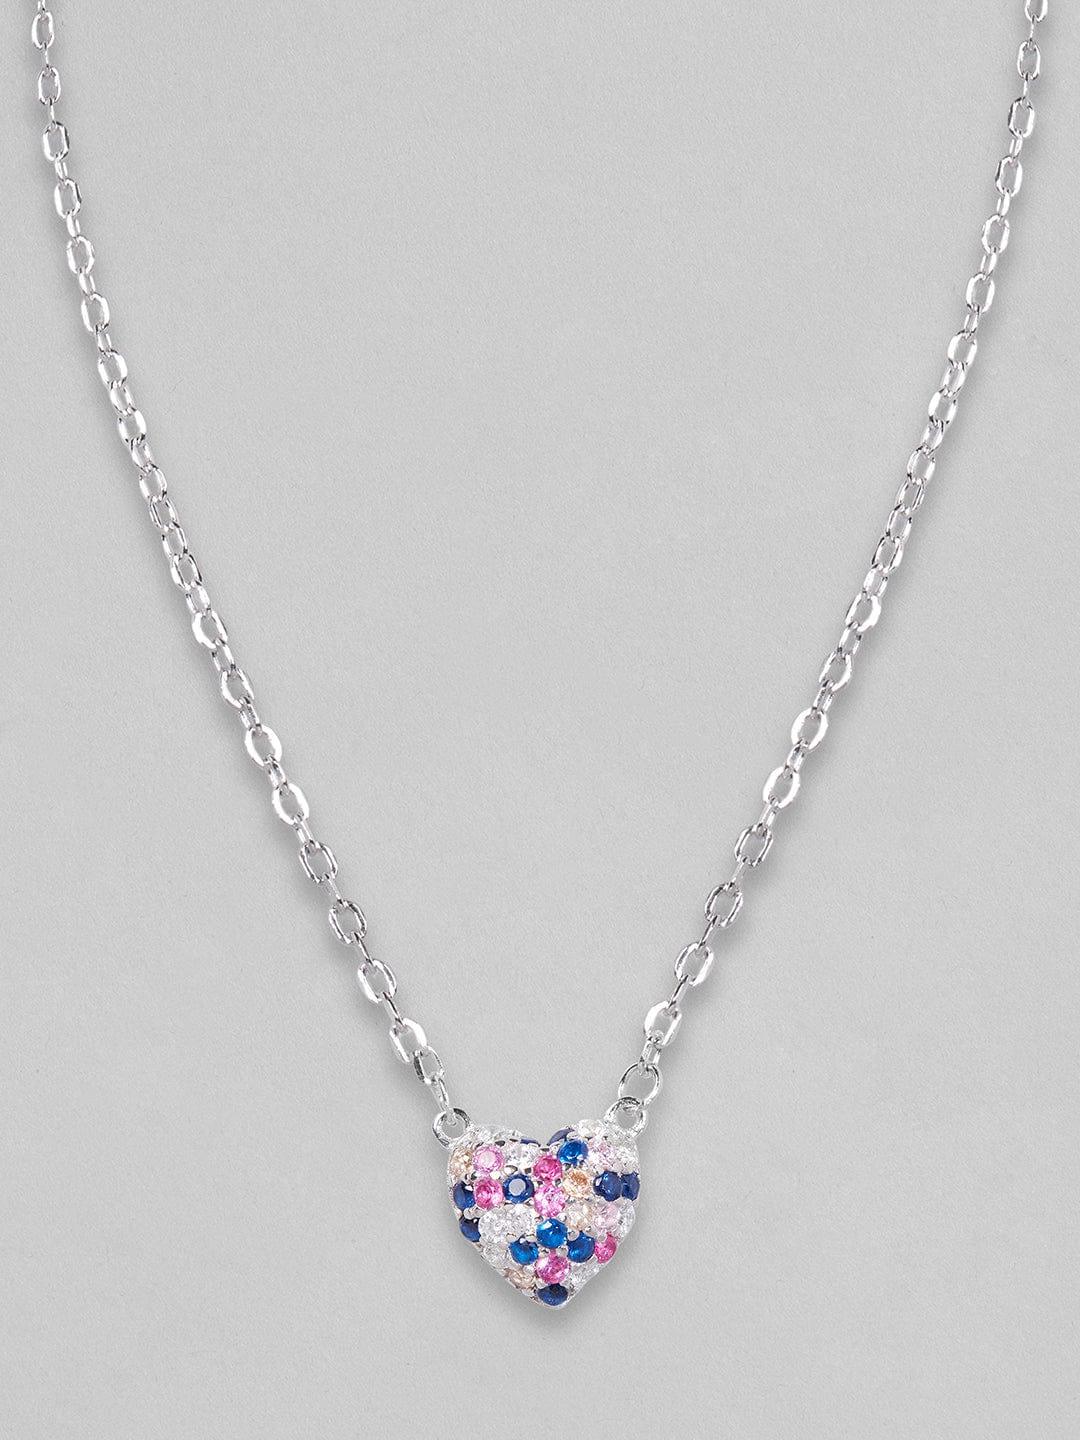 The Heart Holds Multiple Colours - Necklace - Indiakreations